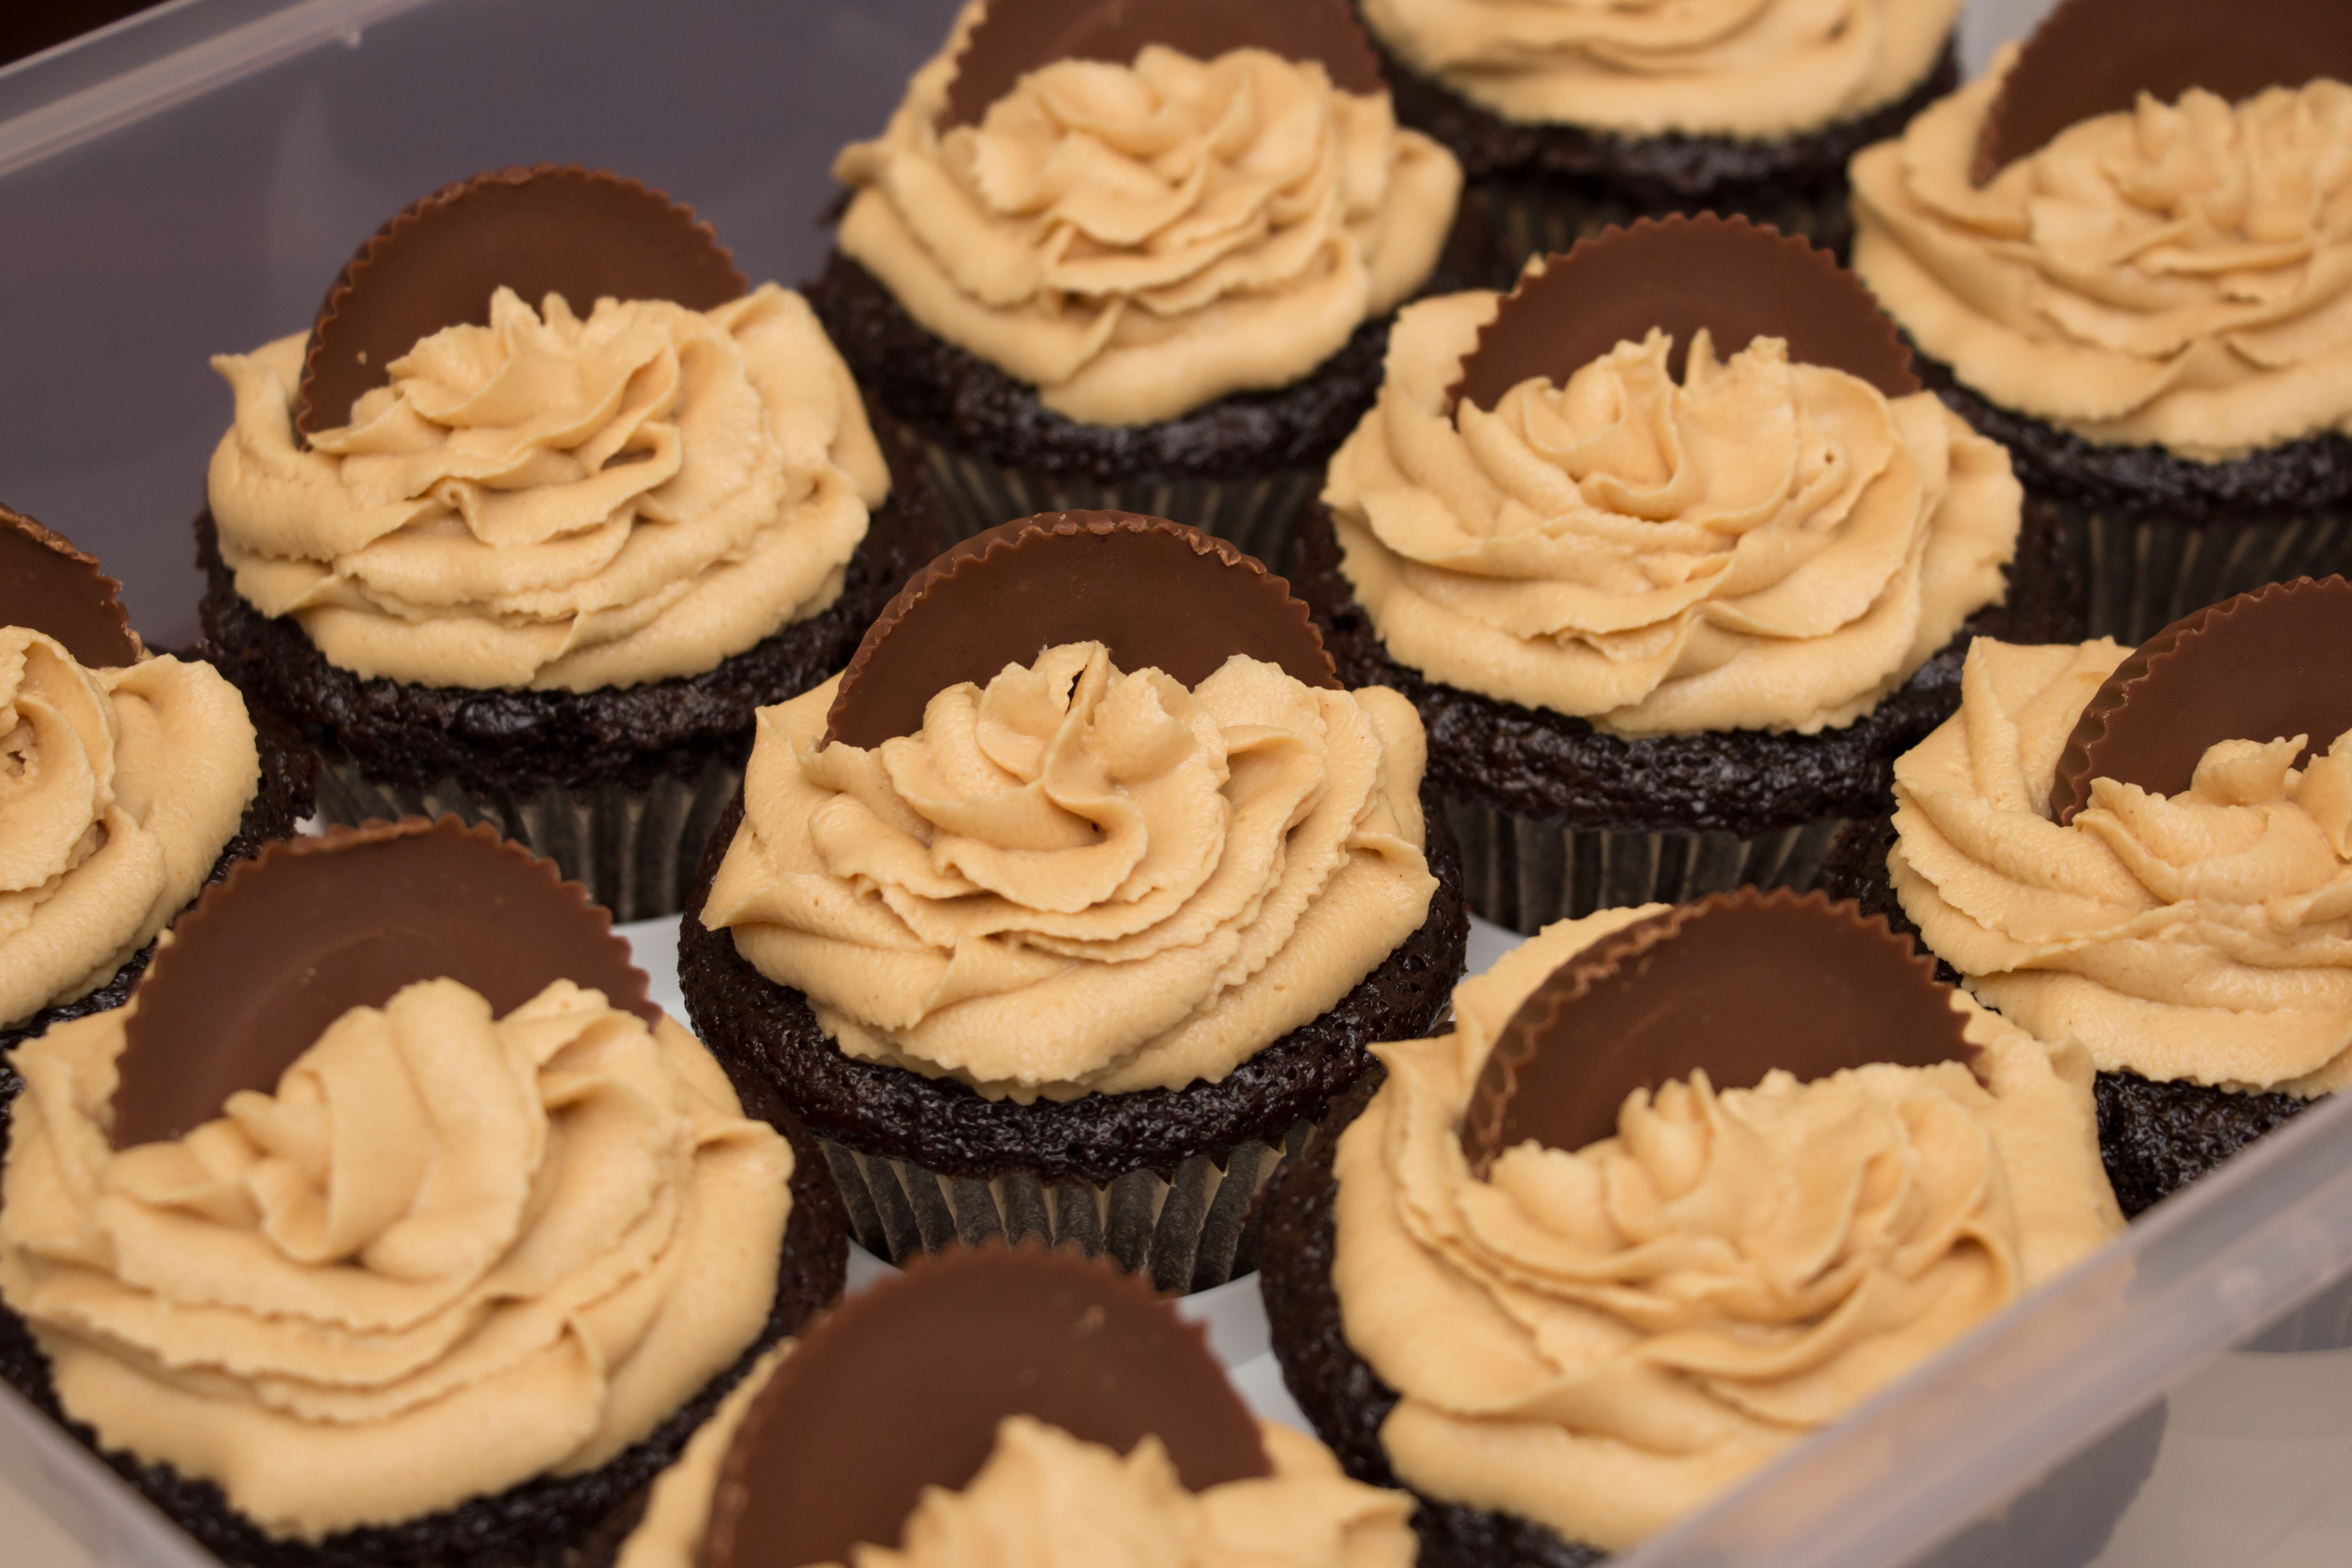 Peanut Butter Frosting 